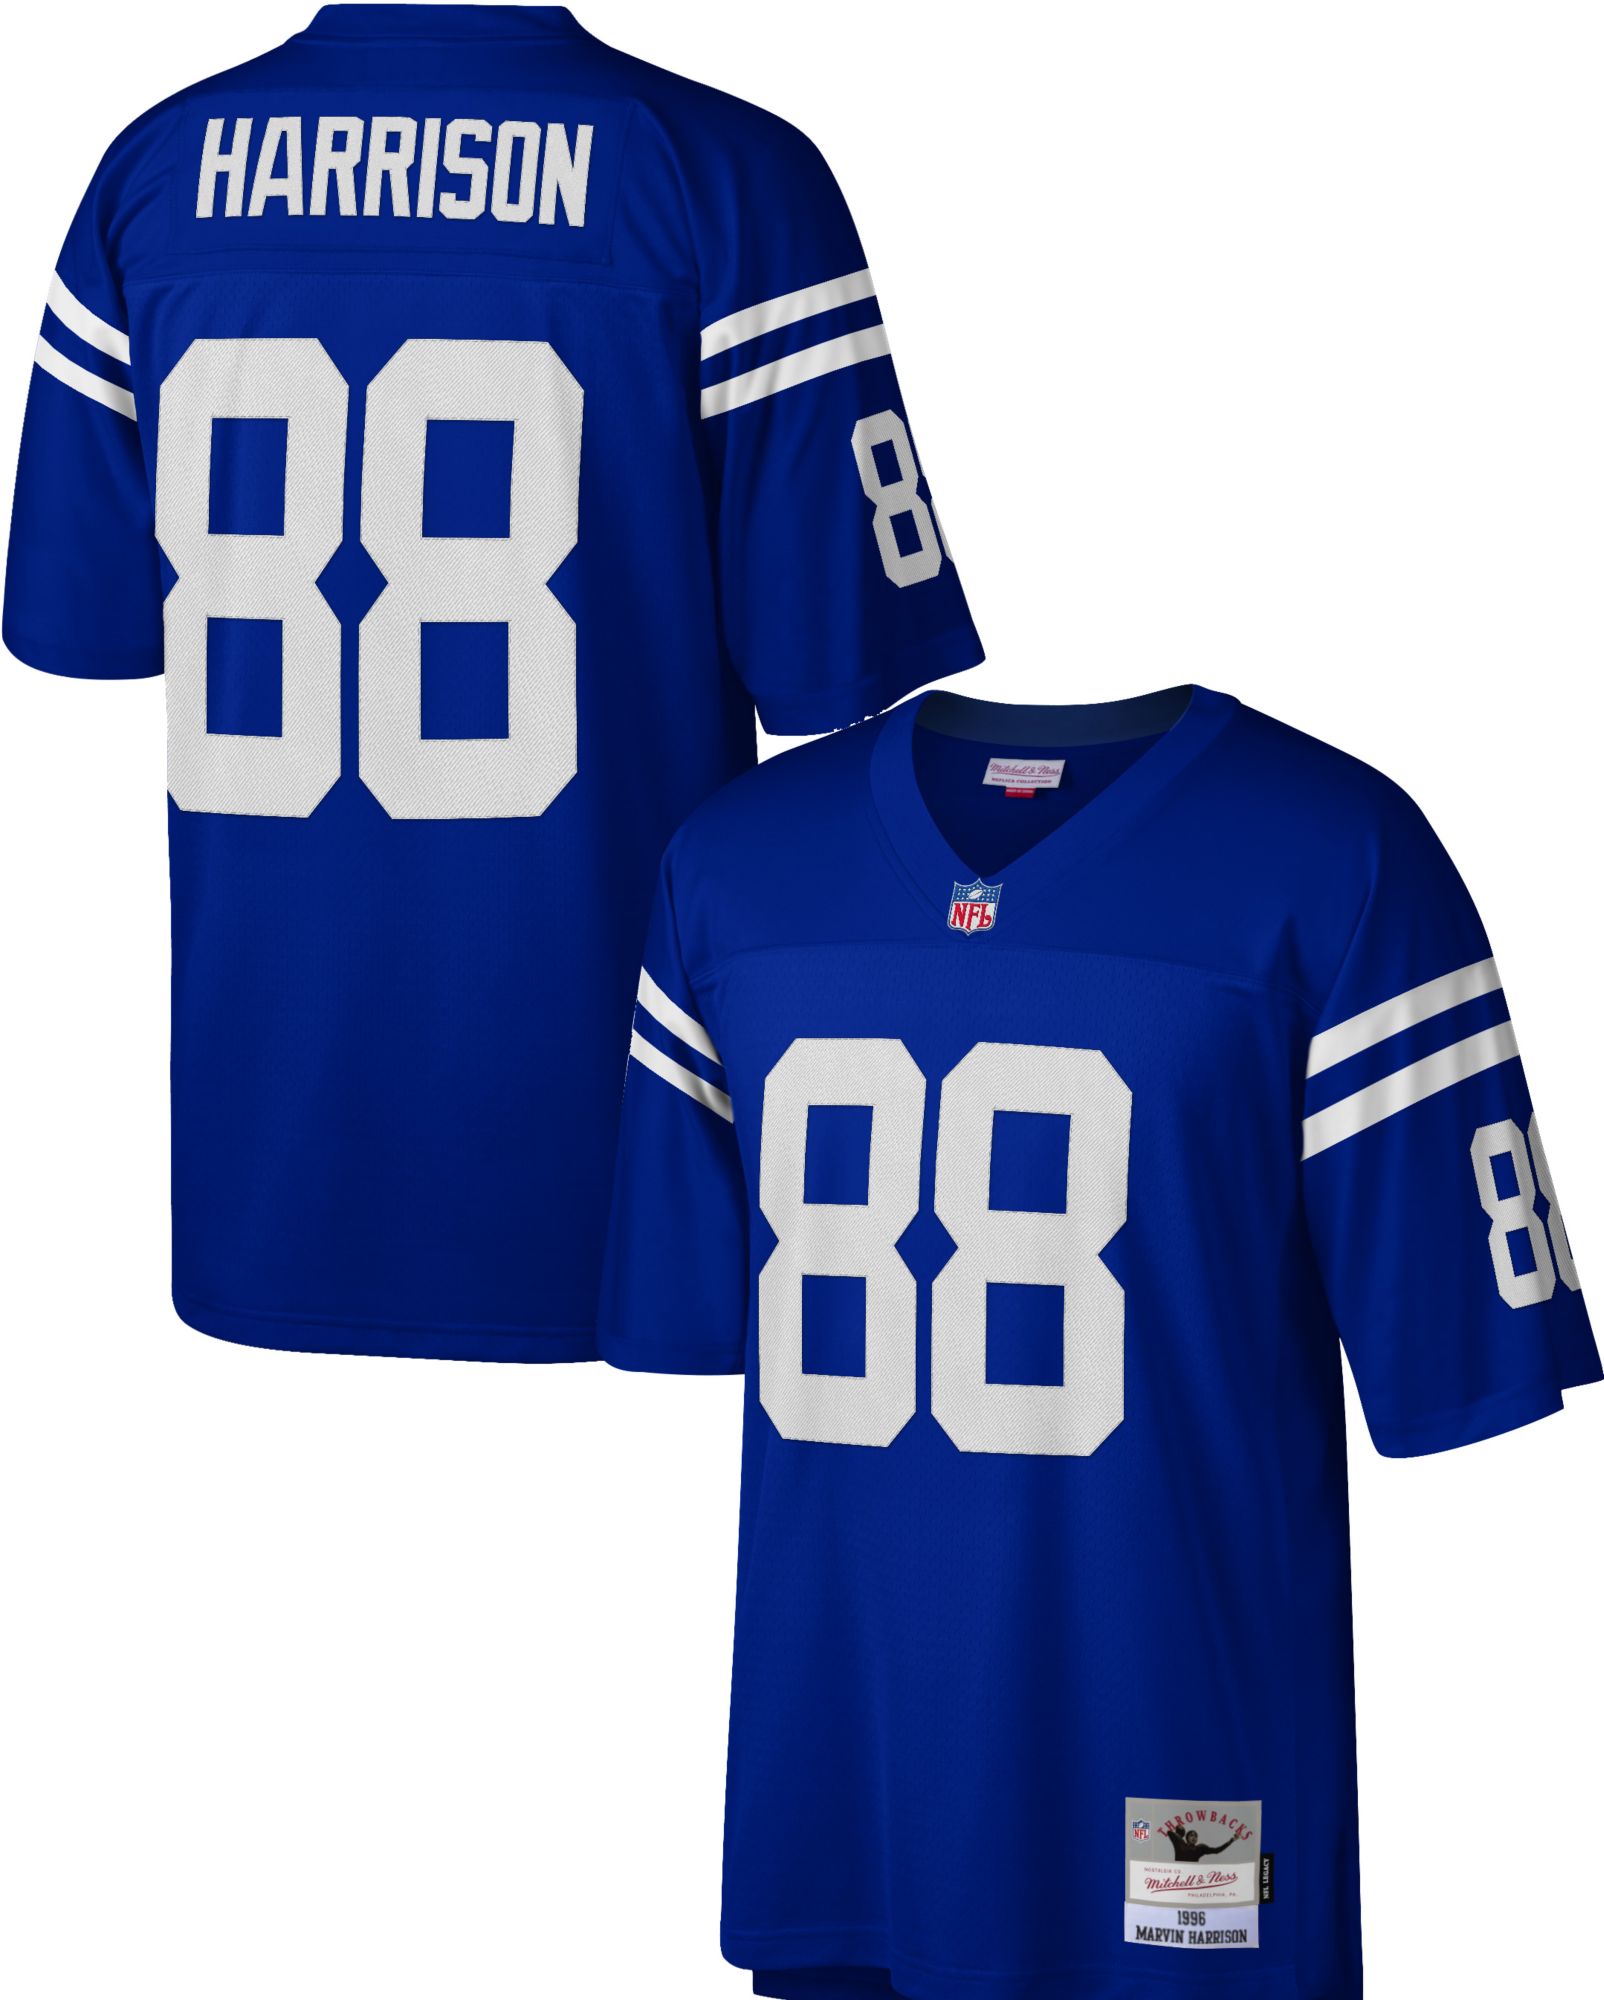 Indianapolis Colts player jersey online